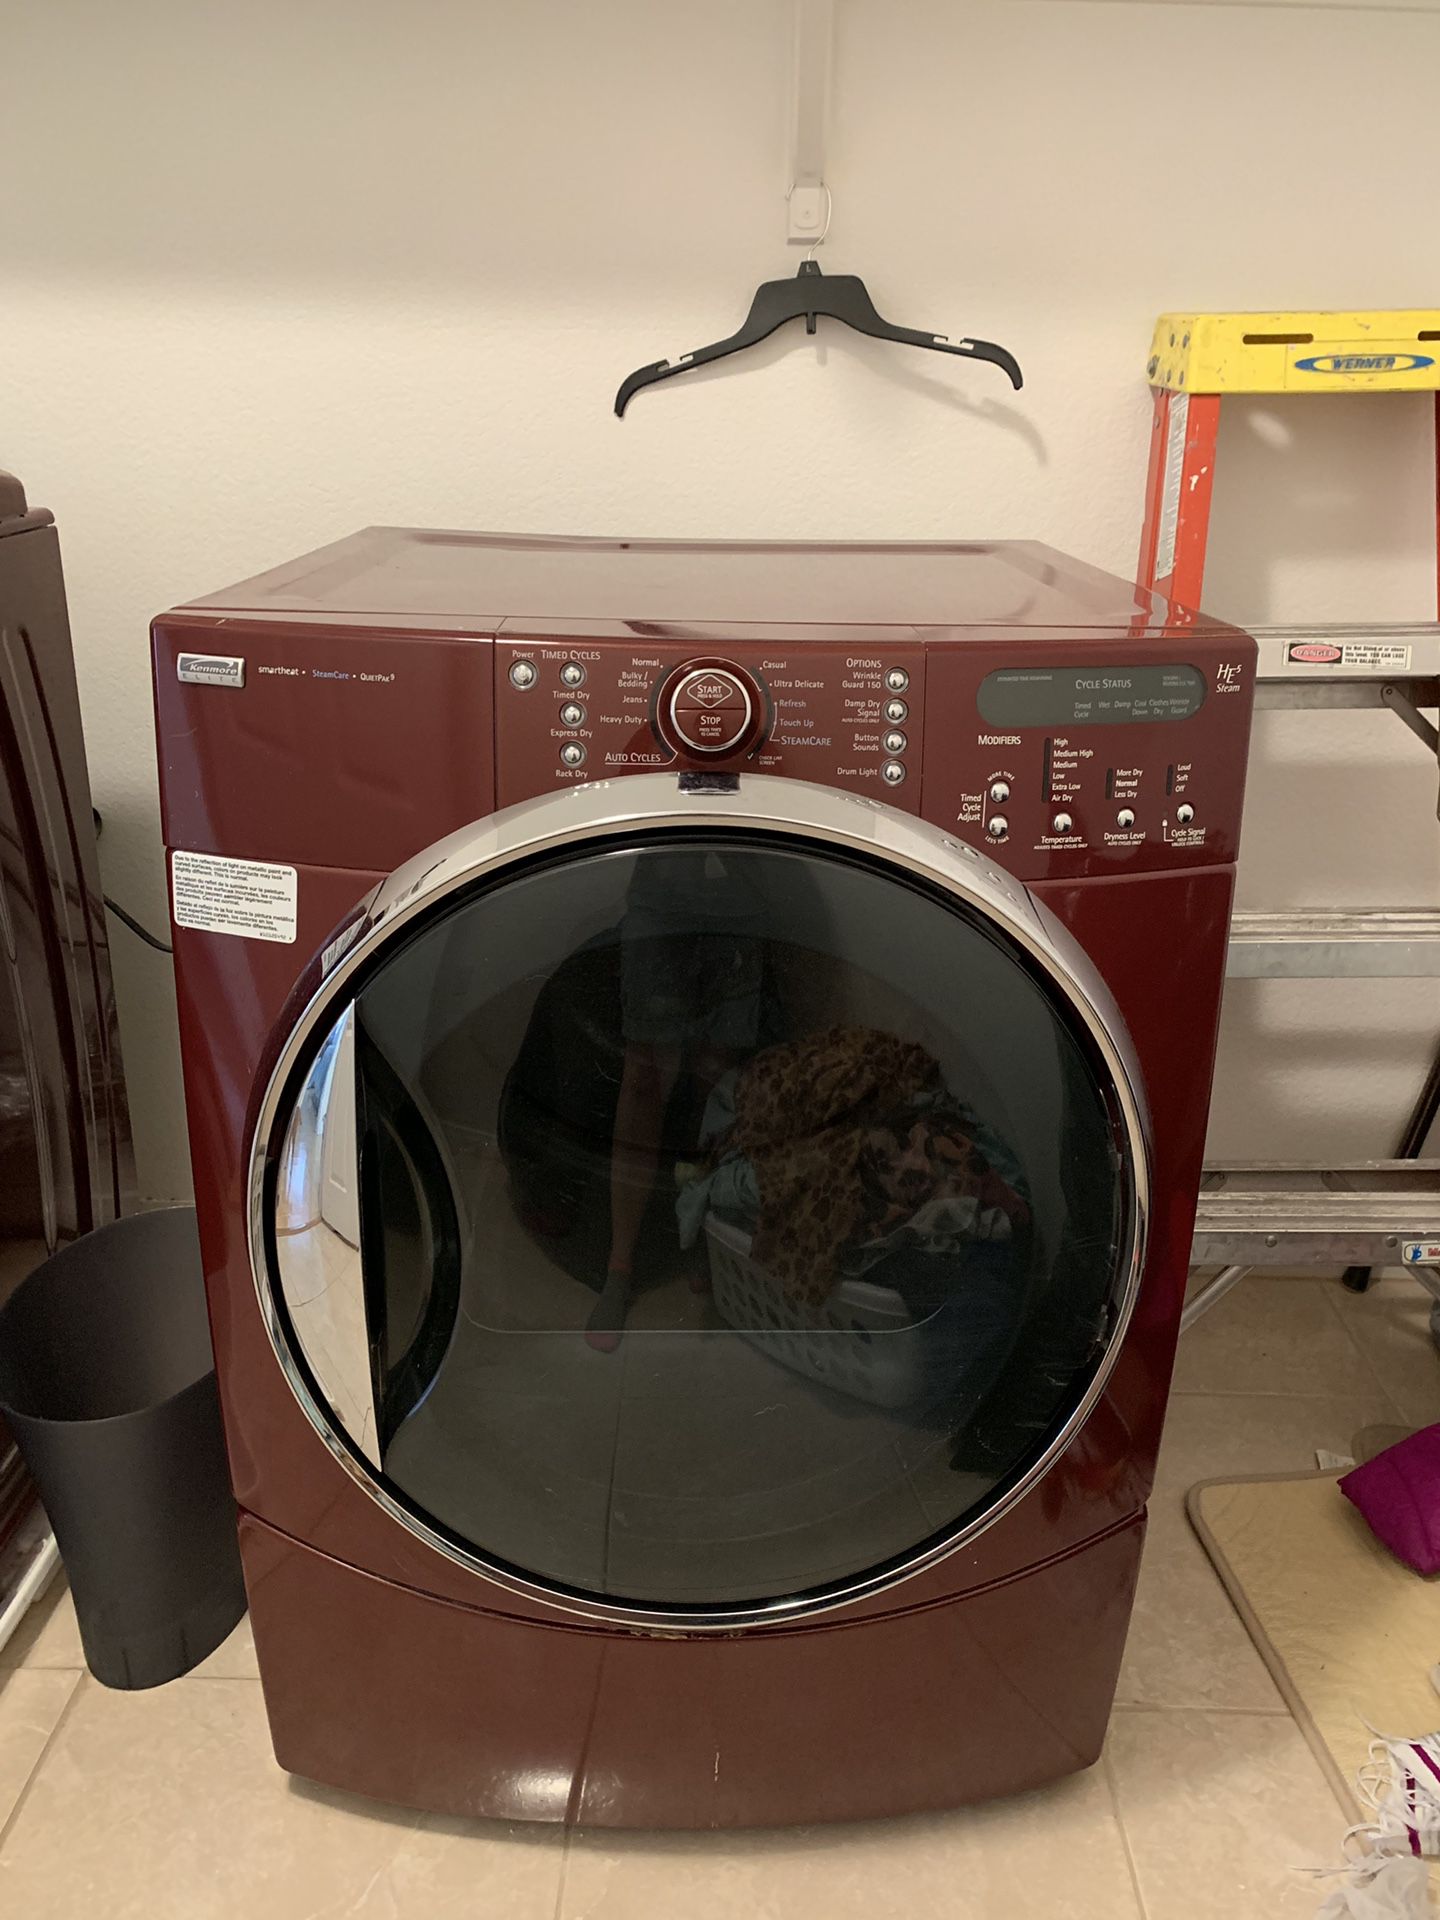 Kenmore Elite HE 5 steam Dryer good used condition, washer broken can take for free if wish to try to fix, asking 50 for dryer